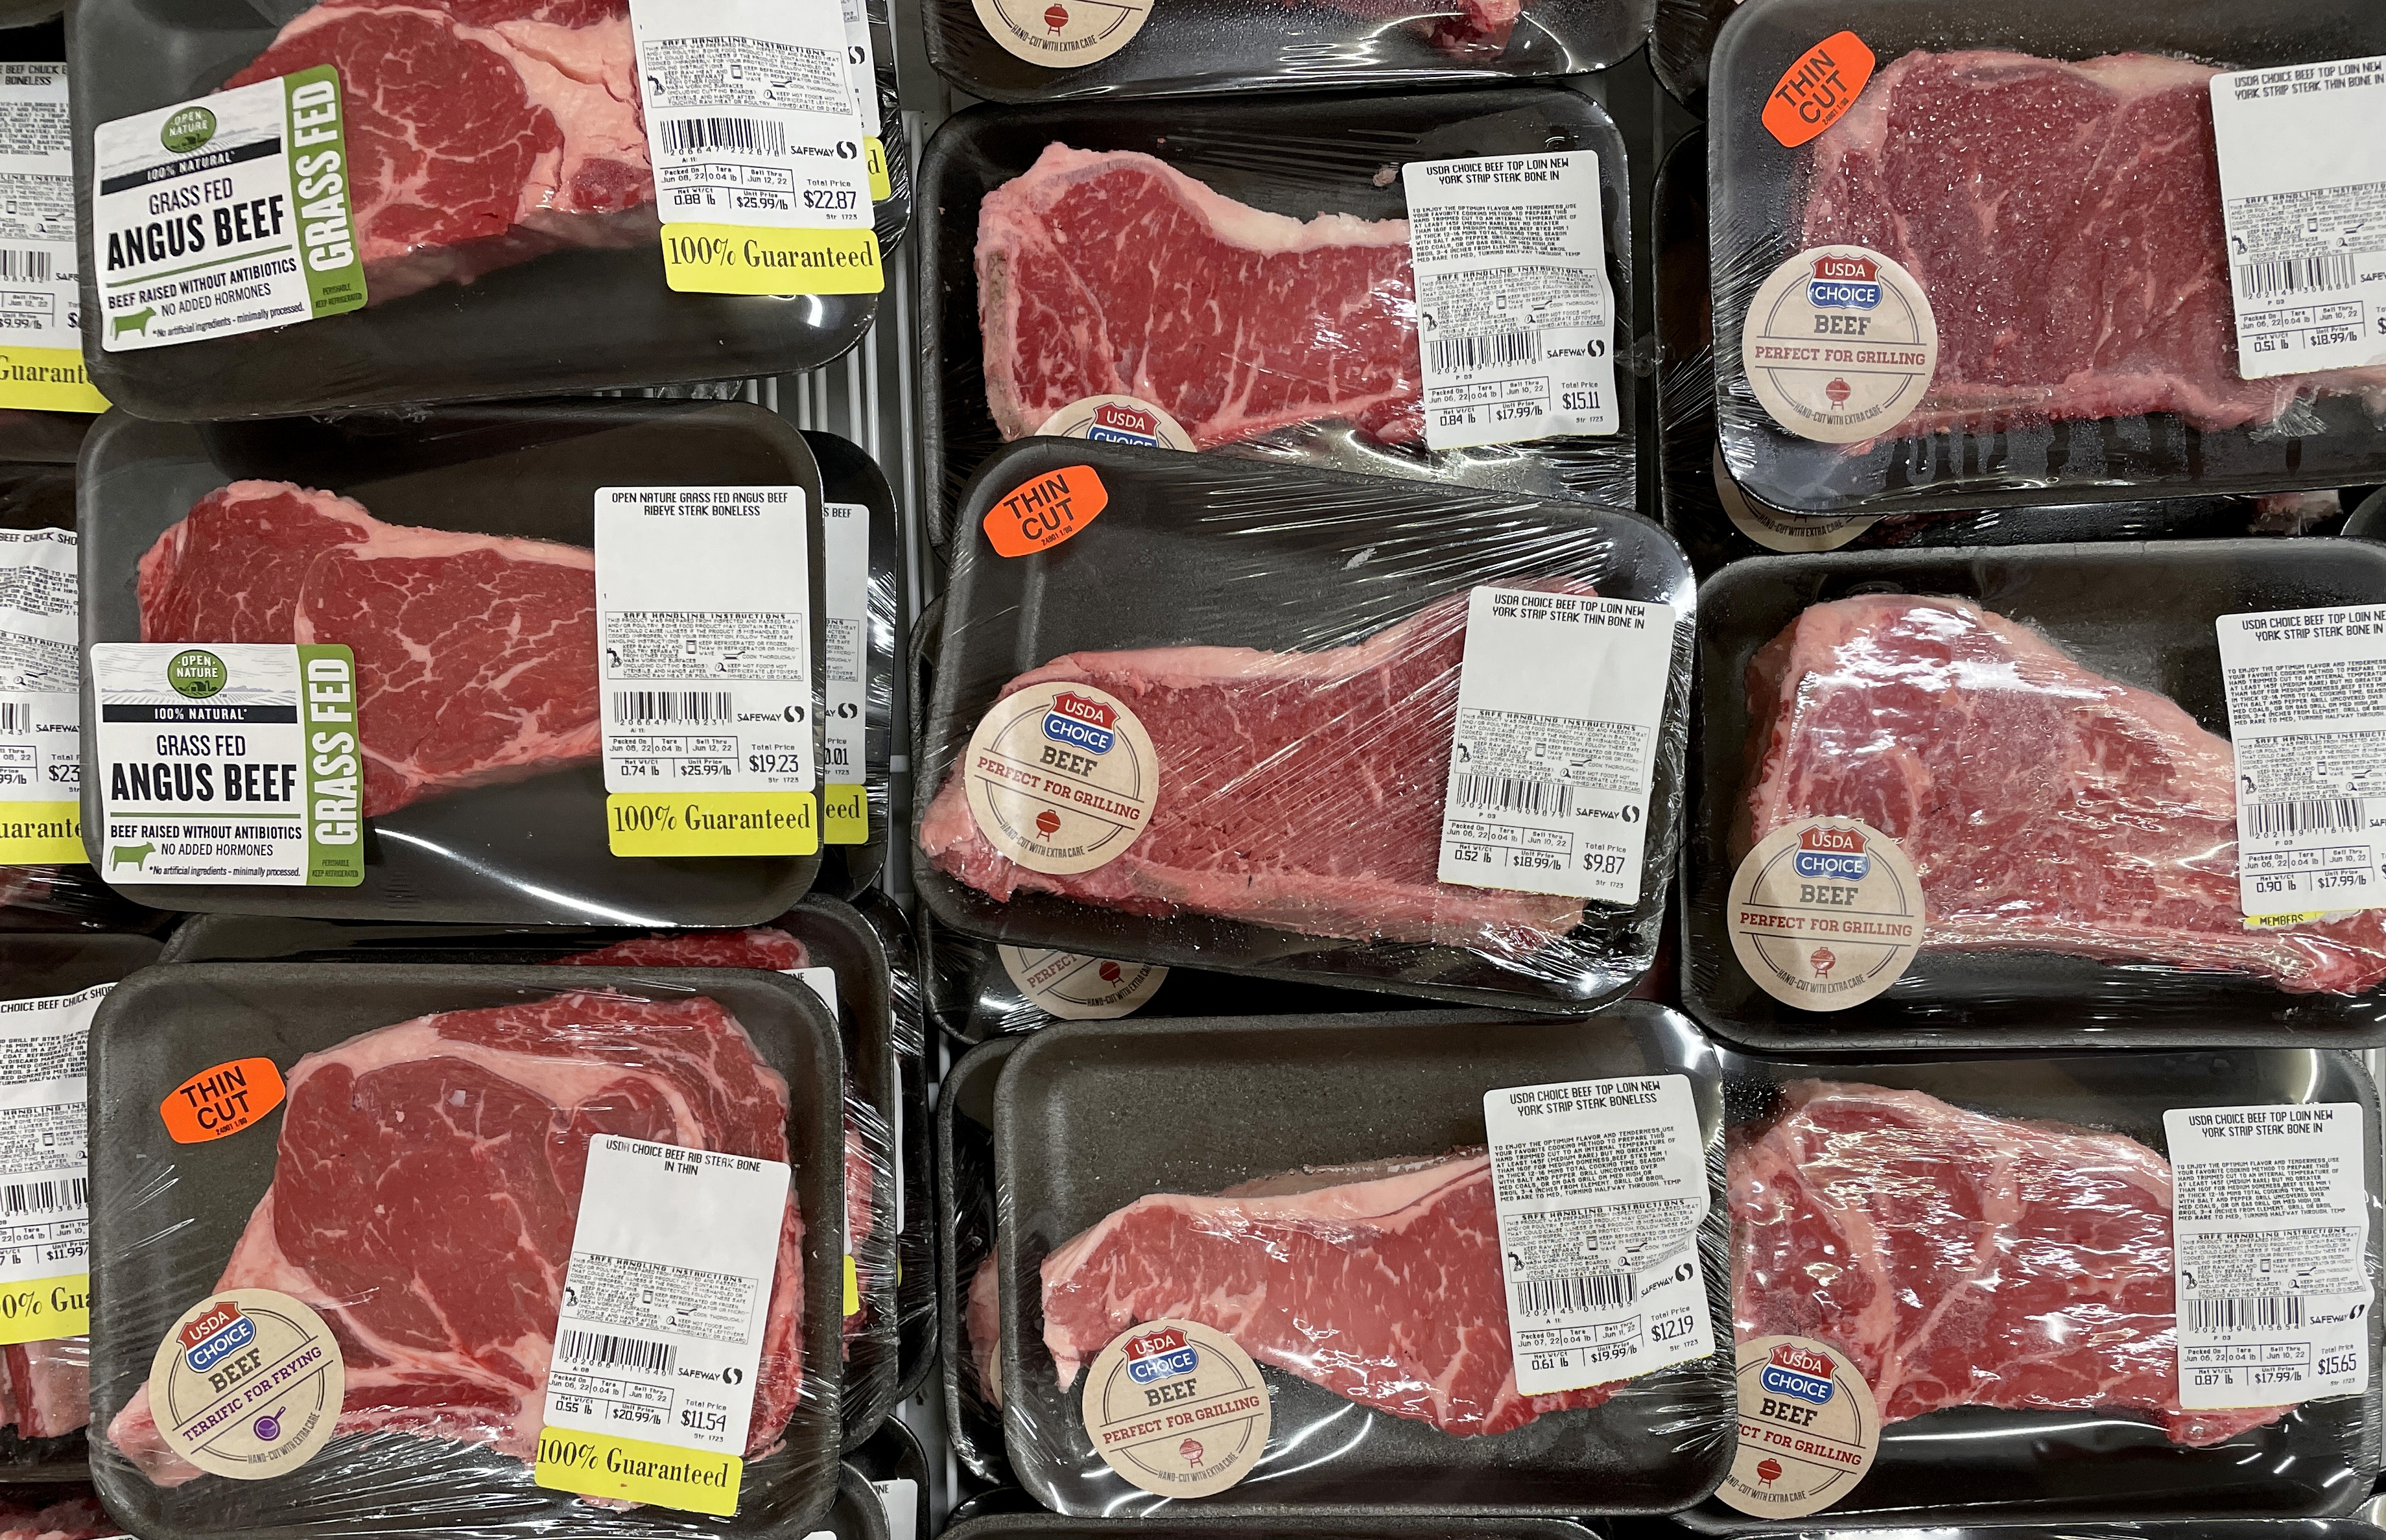 SAN ANSELMO, CALIFORNIA - JUNE 08: Beef steaks are displayed in the meat section at a Safeway store on June 08, 2022 in San Anselmo, California. The U.S. Labor Department will report May's inflation numbers this Friday after reporting a rate of 8.3% in April of this year. (Photo by Justin Sullivan/Getty Images)